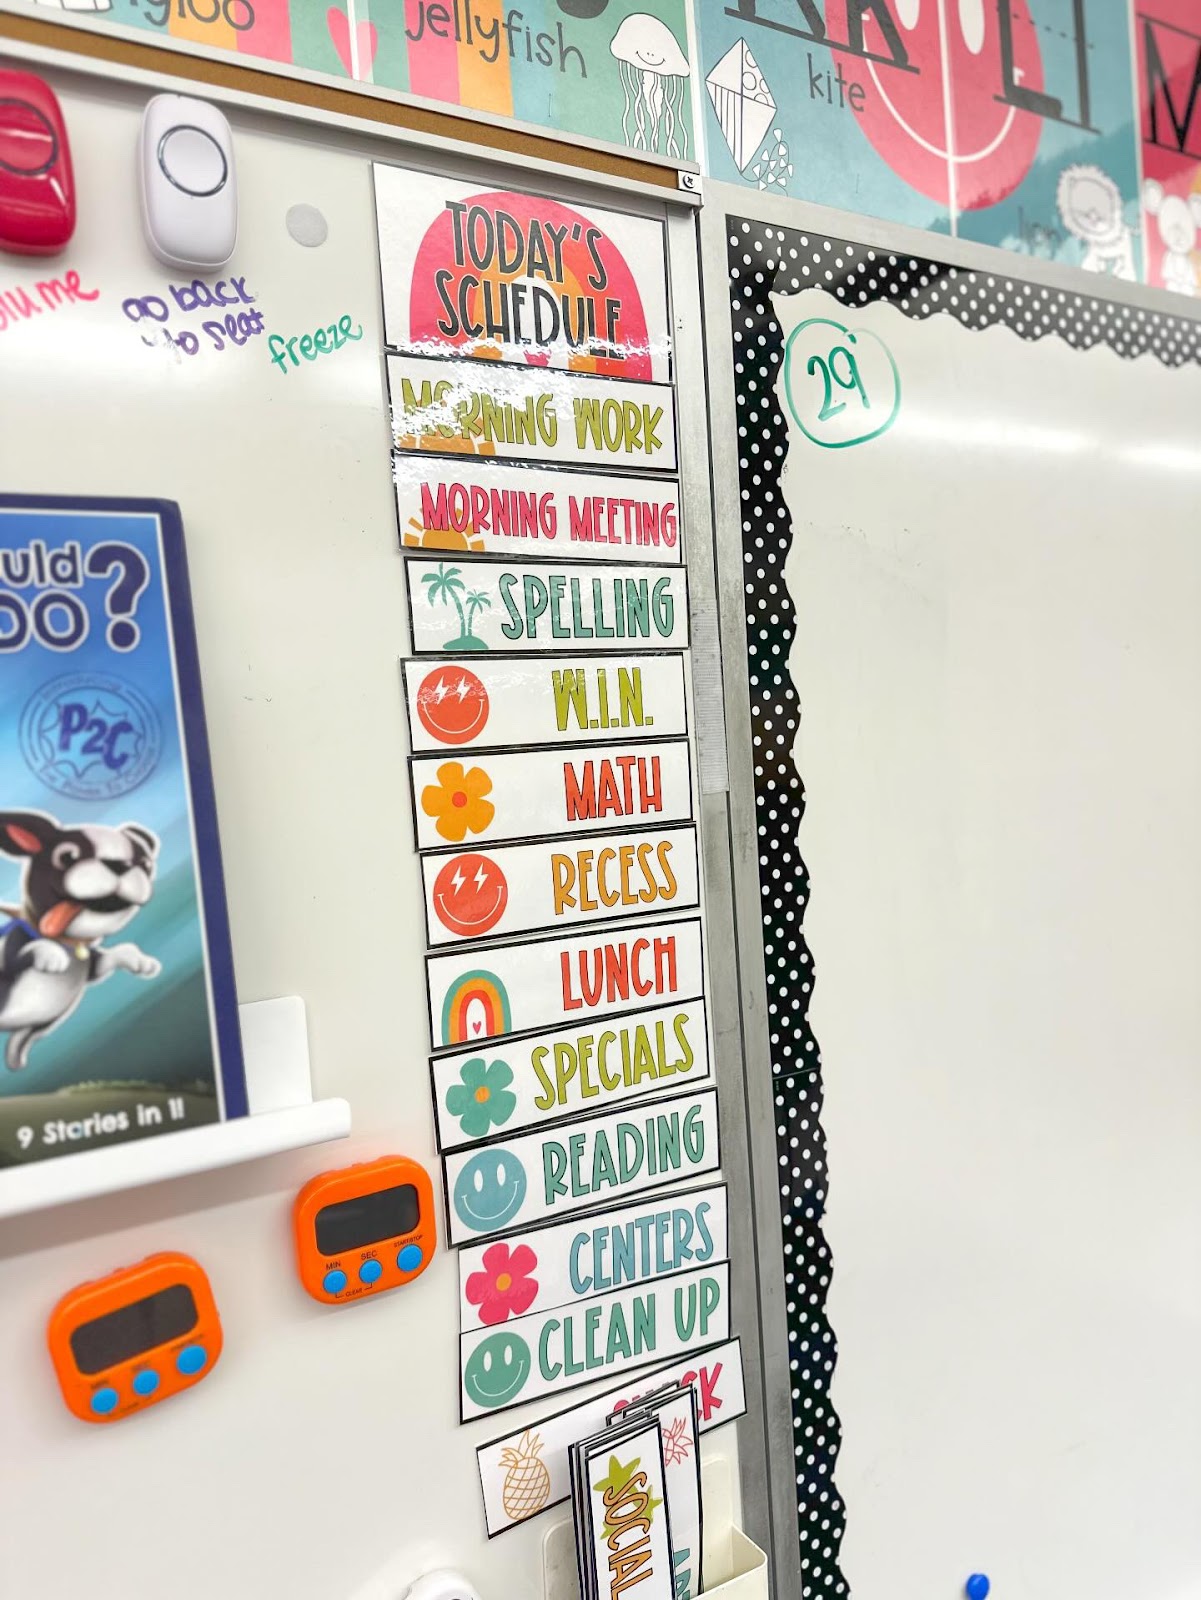 This image shows a closeup of a visual schedule on a whiteboard. The display uses tropical colors and icons. Each card in the schedule lists a specific subject like "Morning Meeting" or "Math". 